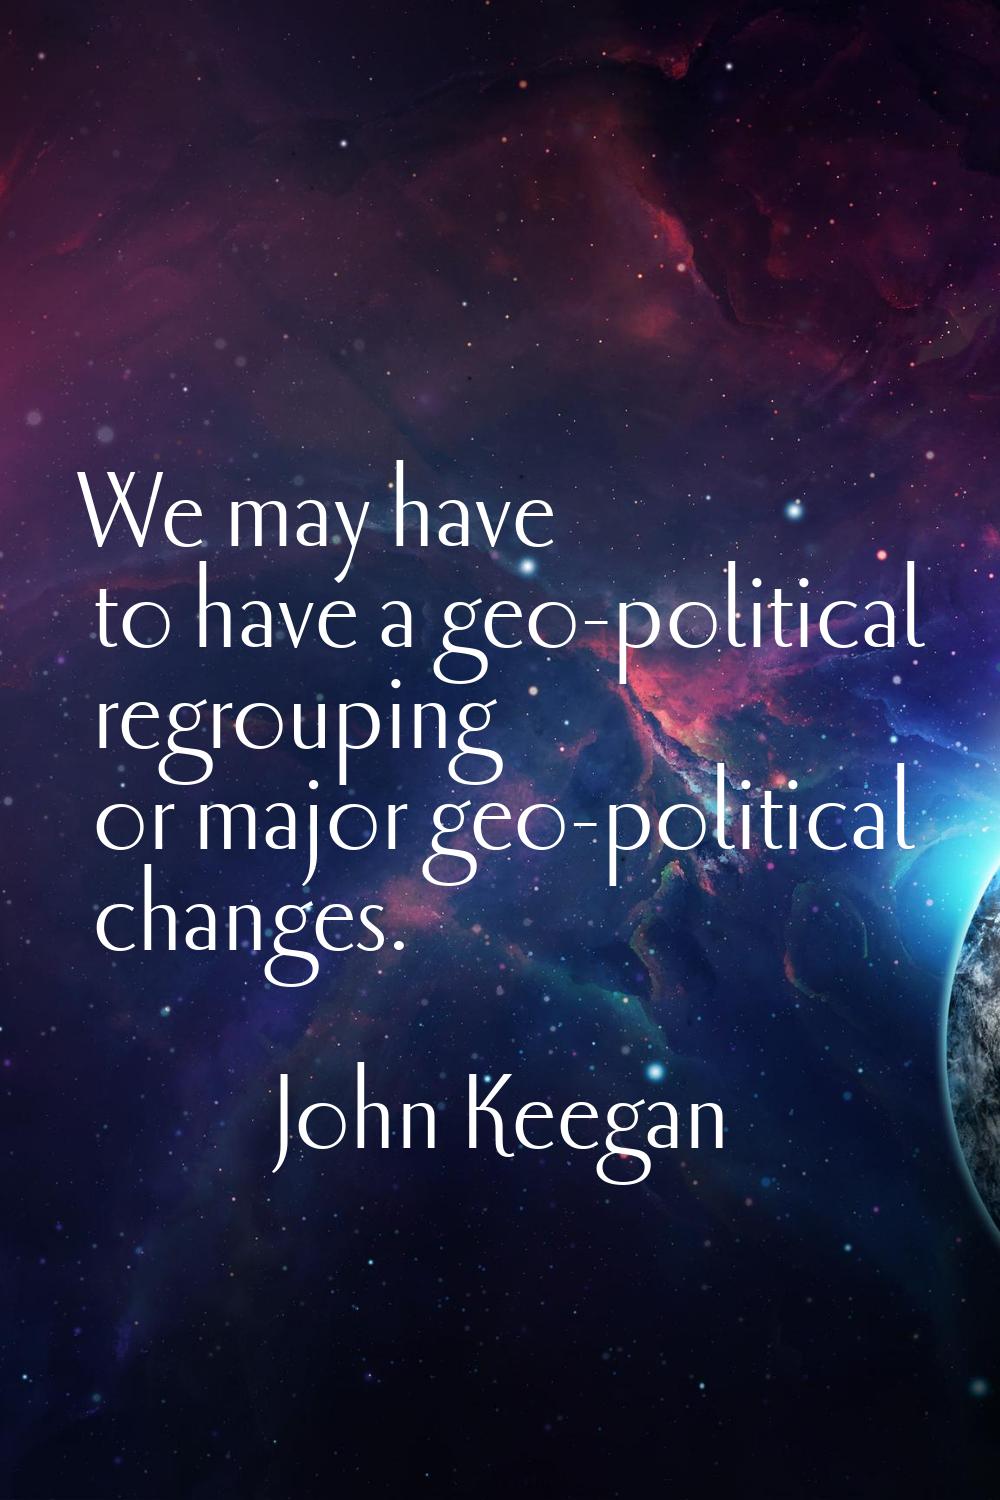 We may have to have a geo-political regrouping or major geo-political changes.